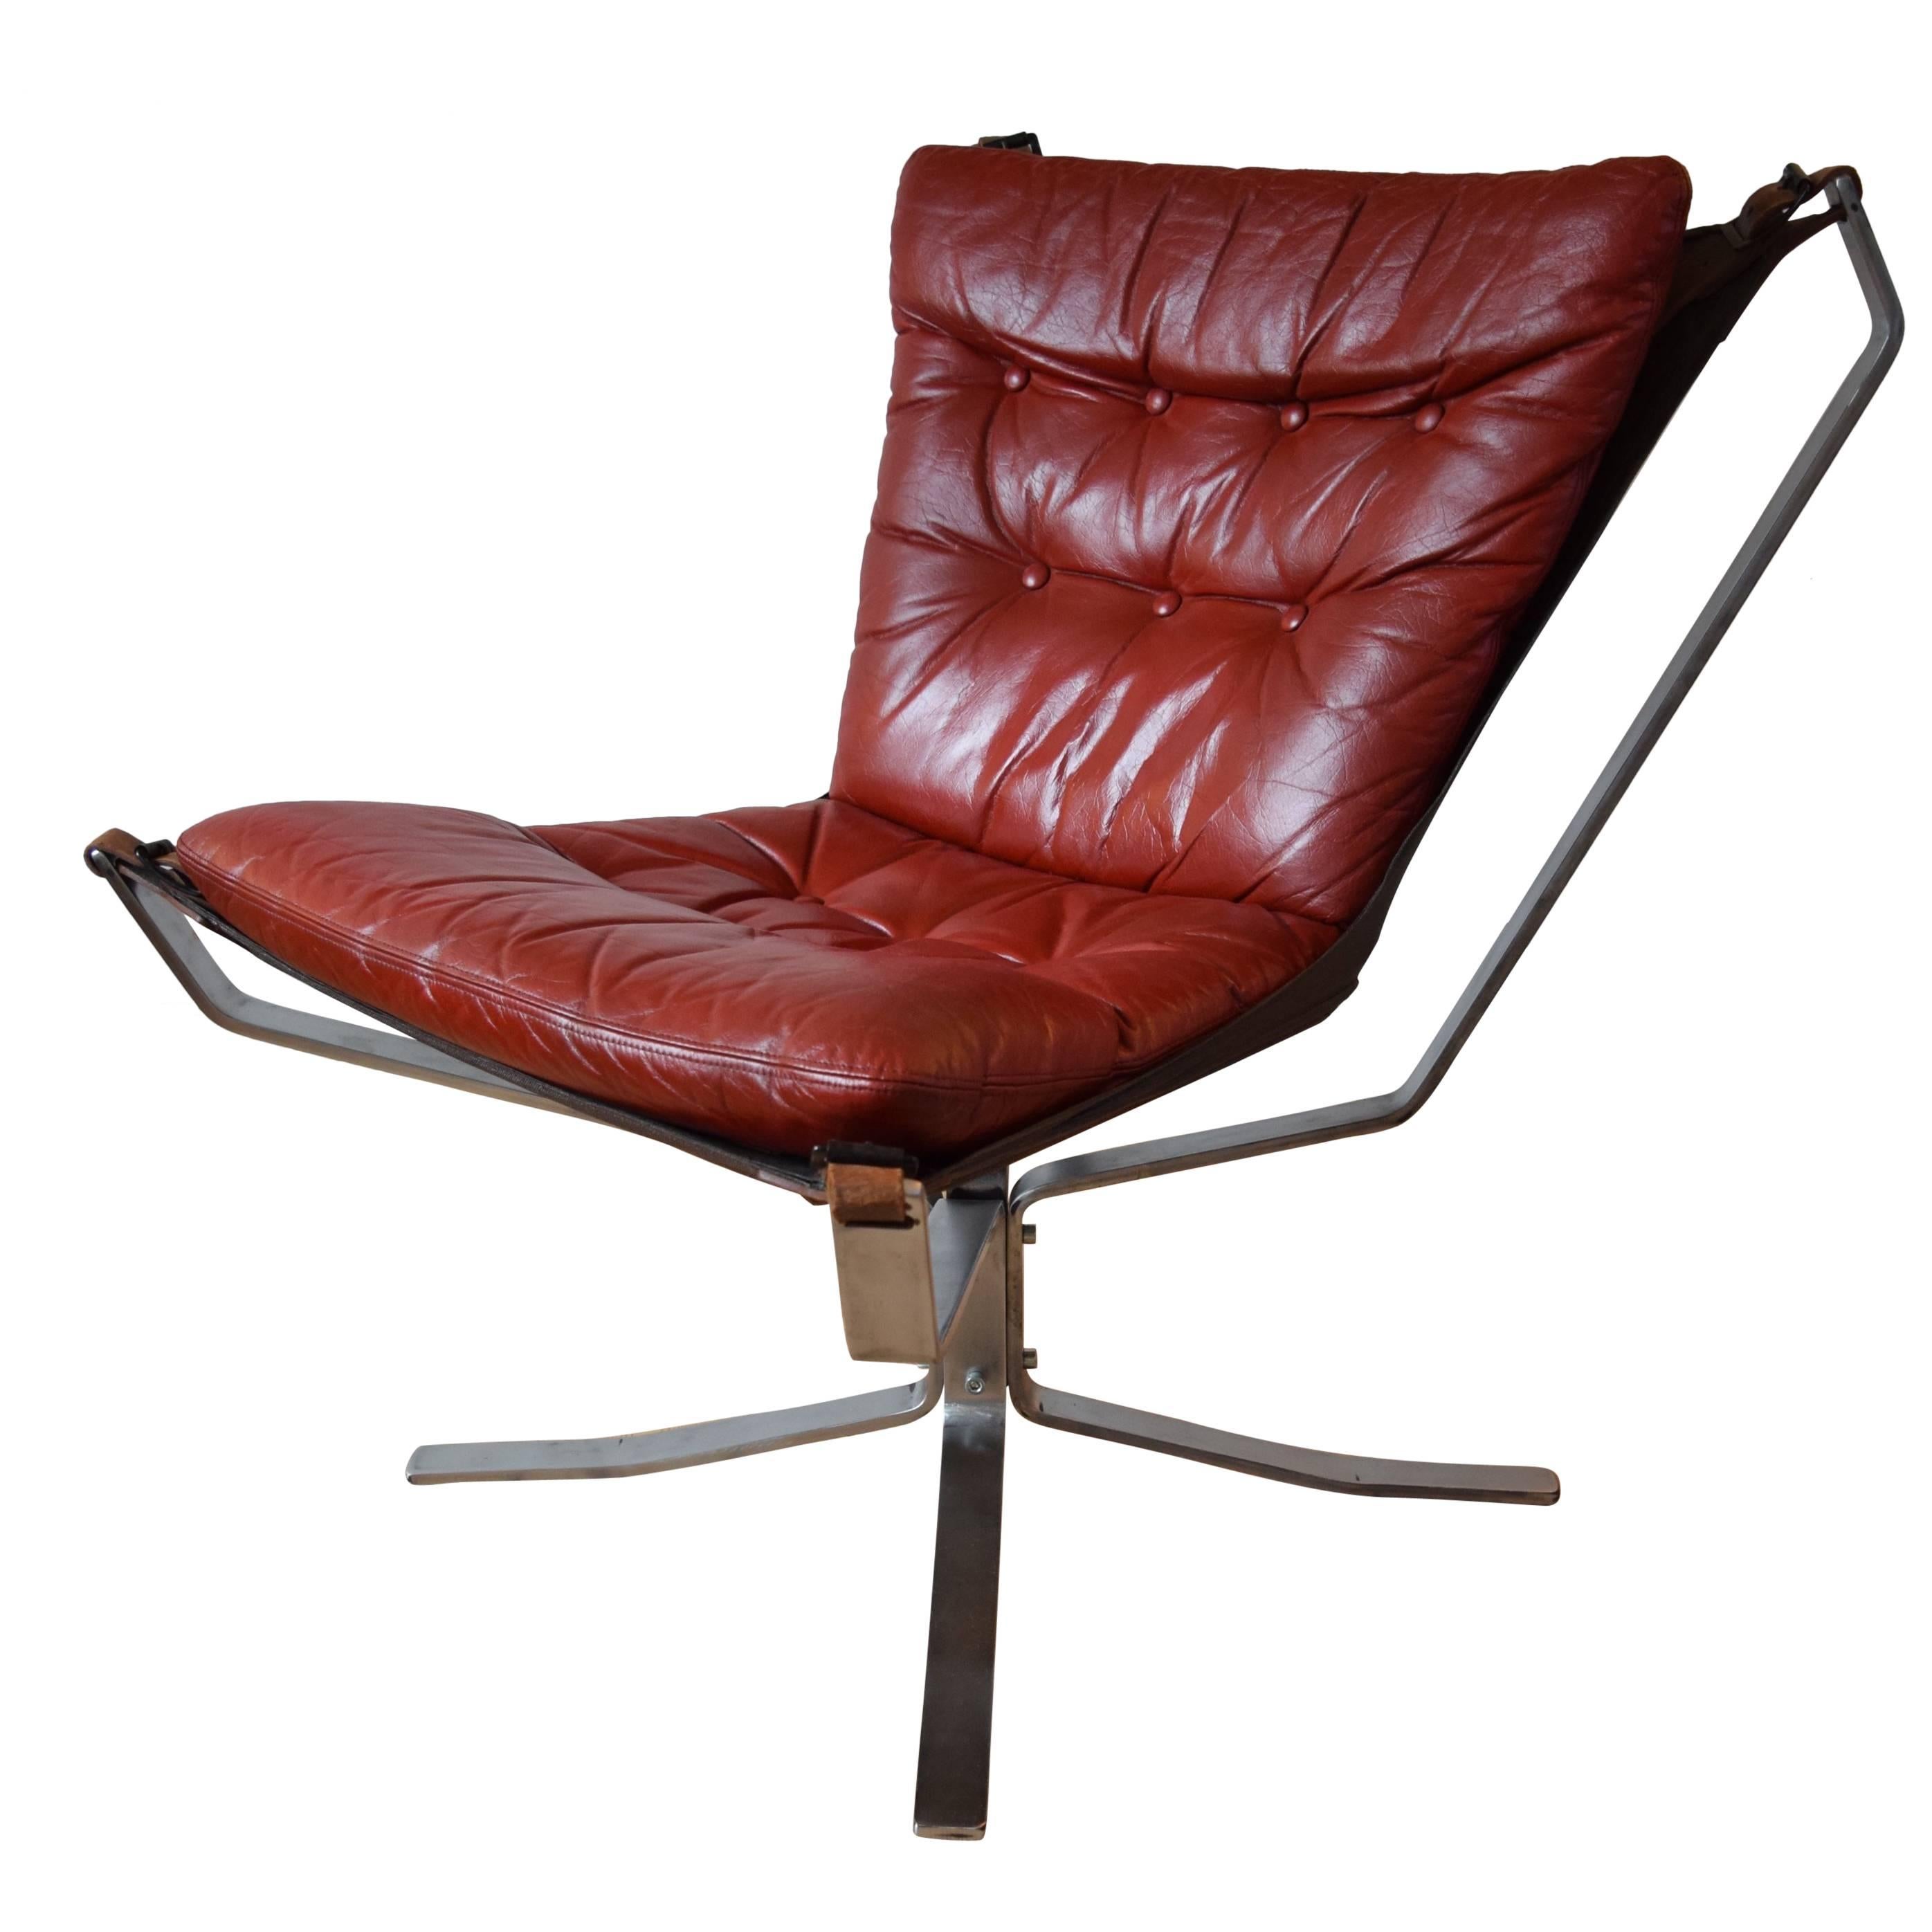 Danish Chrome Base Falcon Chair, SIgurd Ressell, 1970's. For Sale